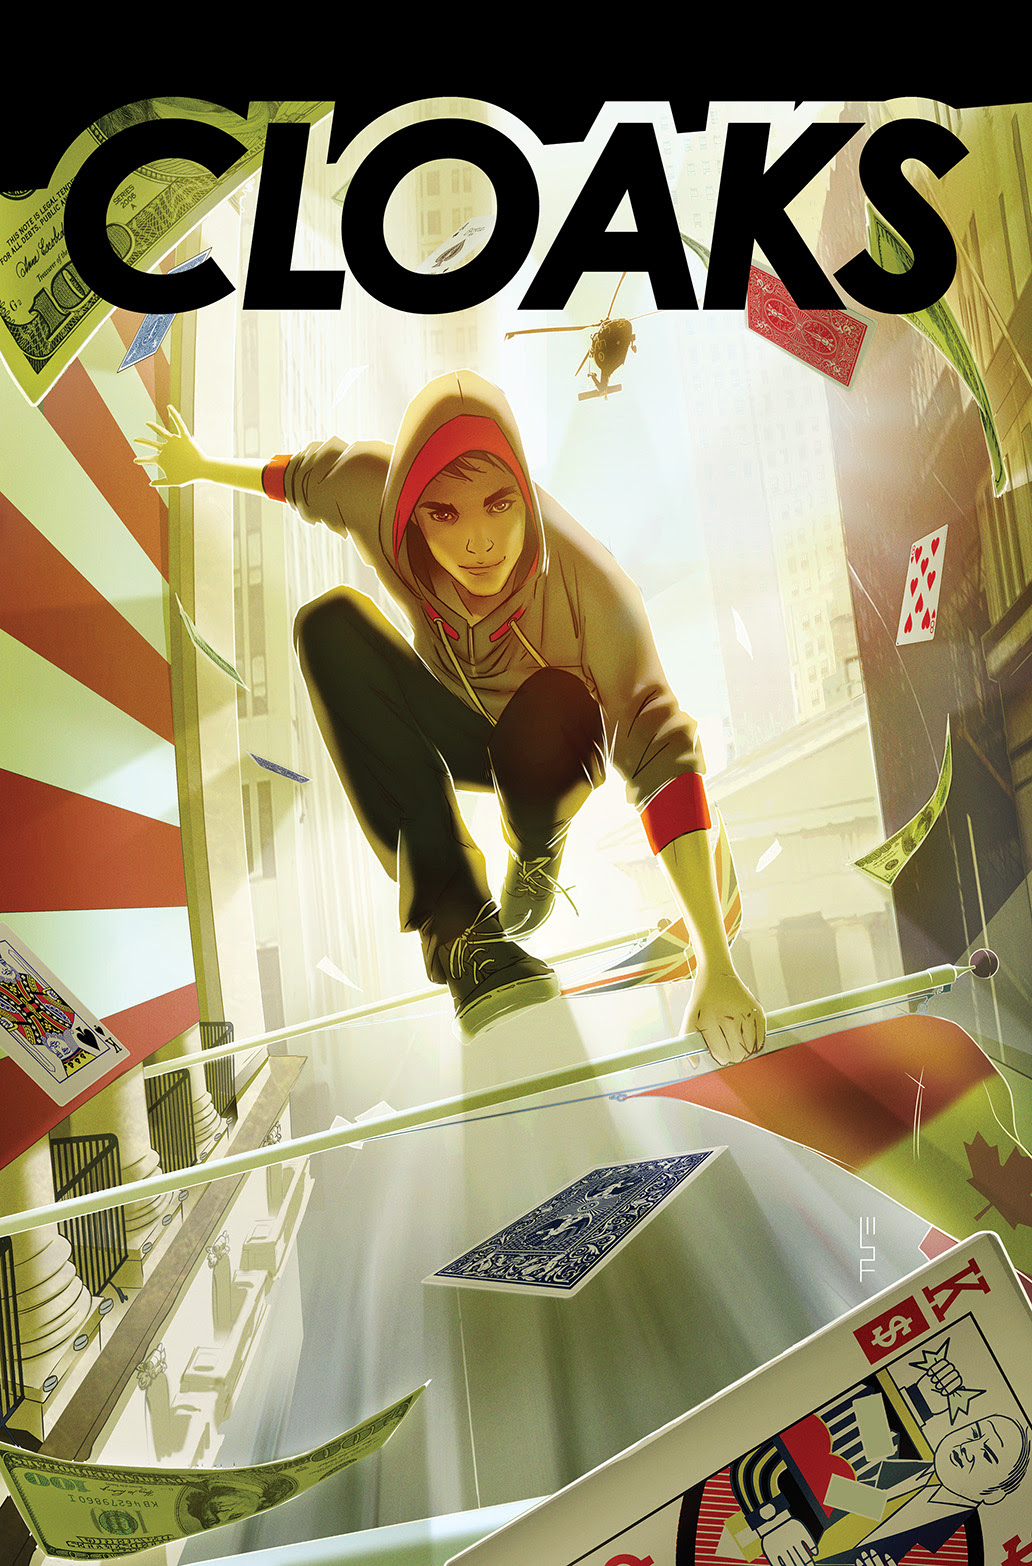 CLOAKS #1 Cover A by Scott Forbes